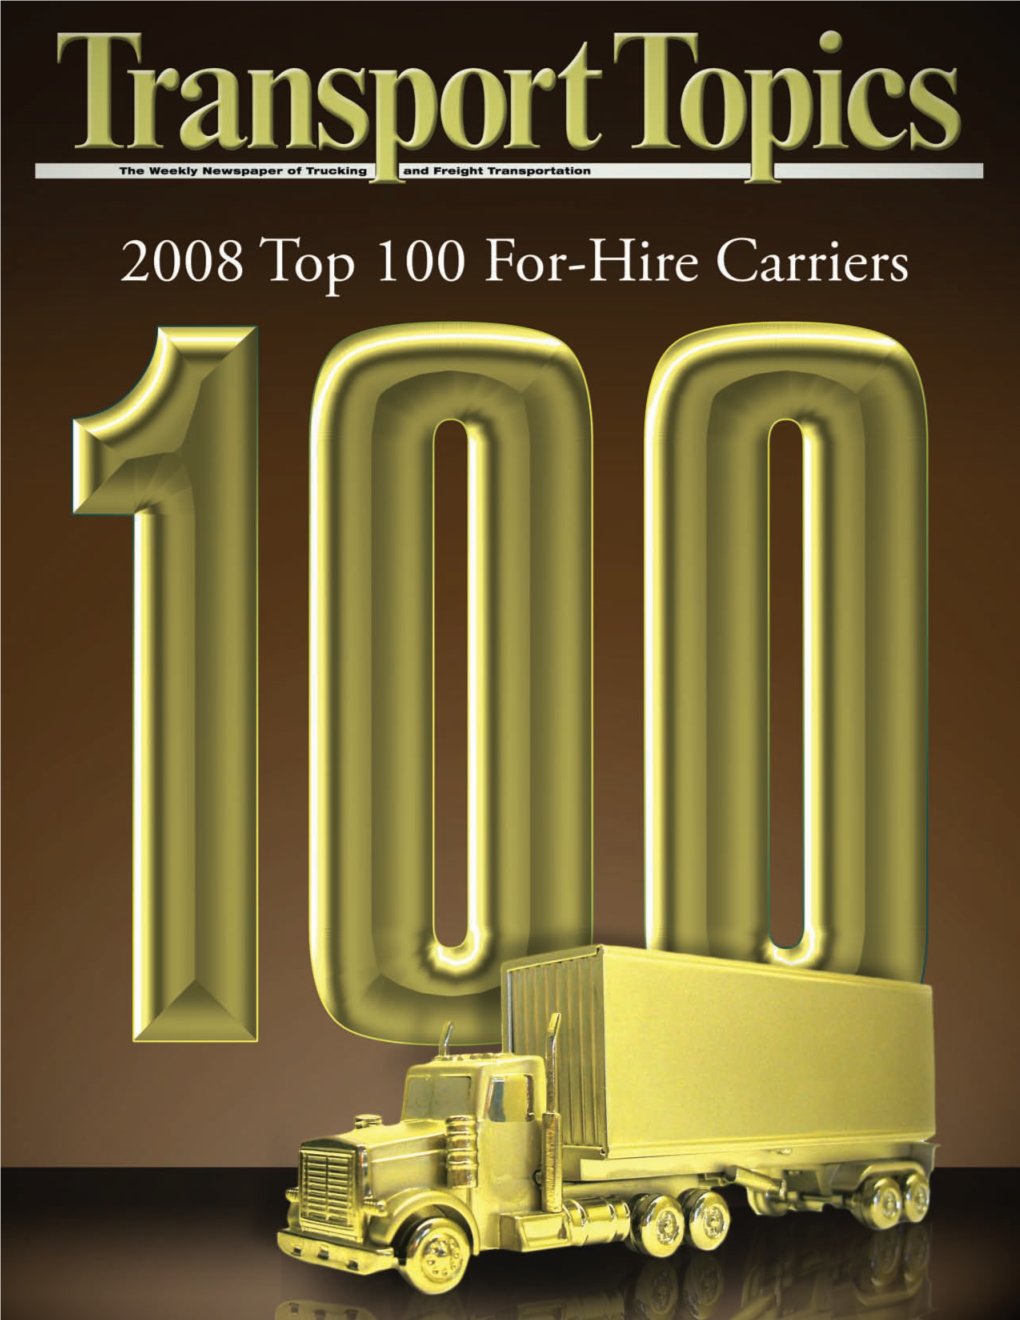 2008 Top 100 For-Hire Carriers List